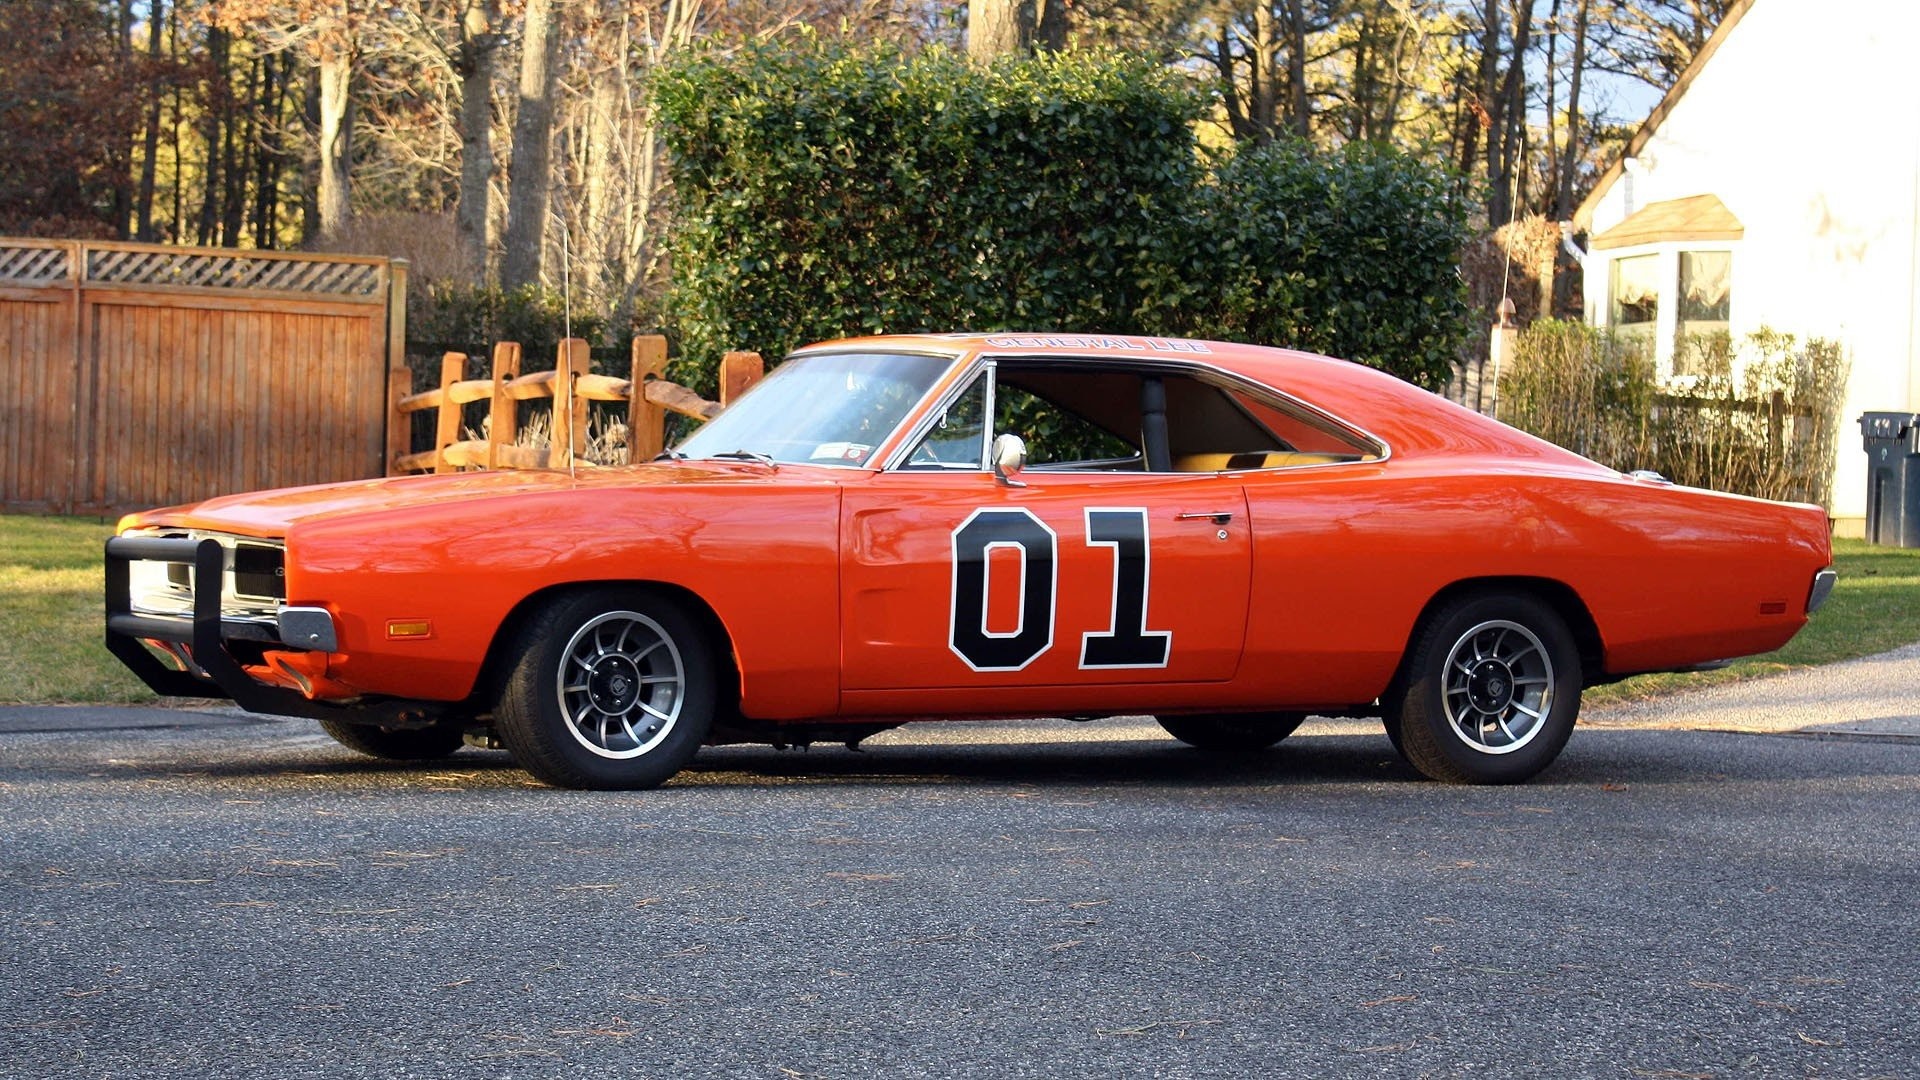 Dukes Of Hazzard’s Charger